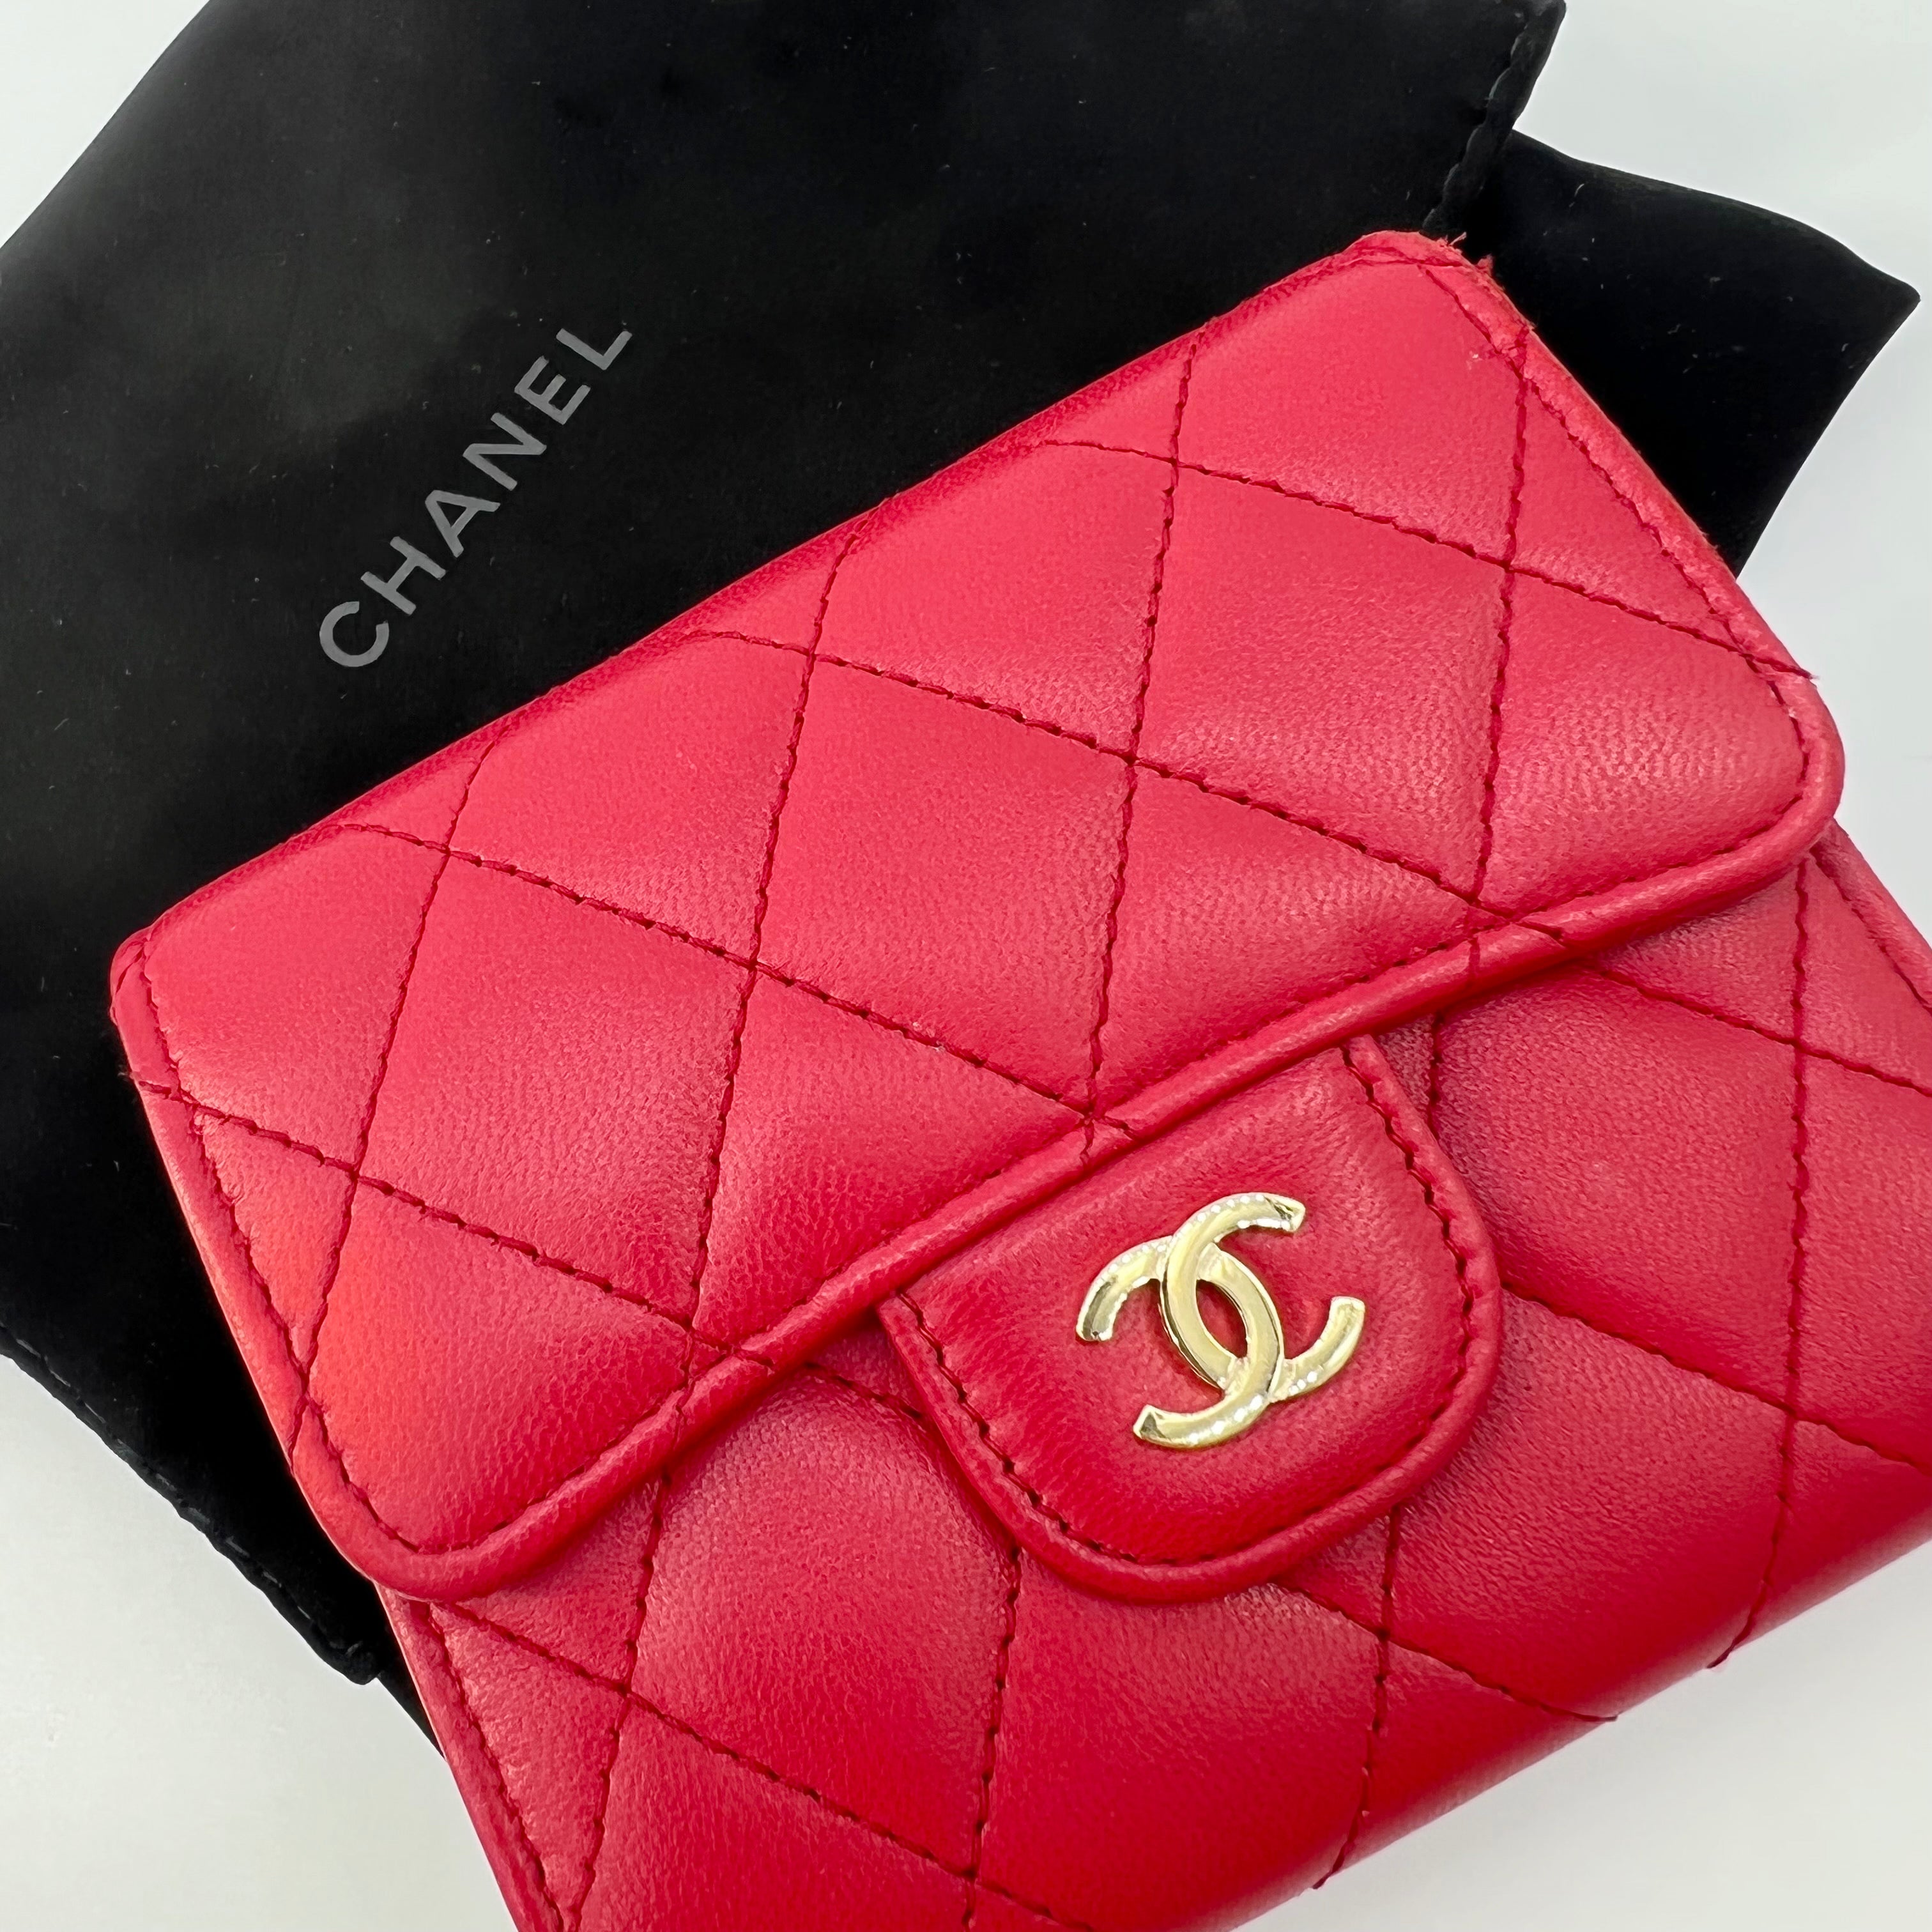 Guaranteed Authentic Chanel CC Quilted Compact Flap Trifold Wallet